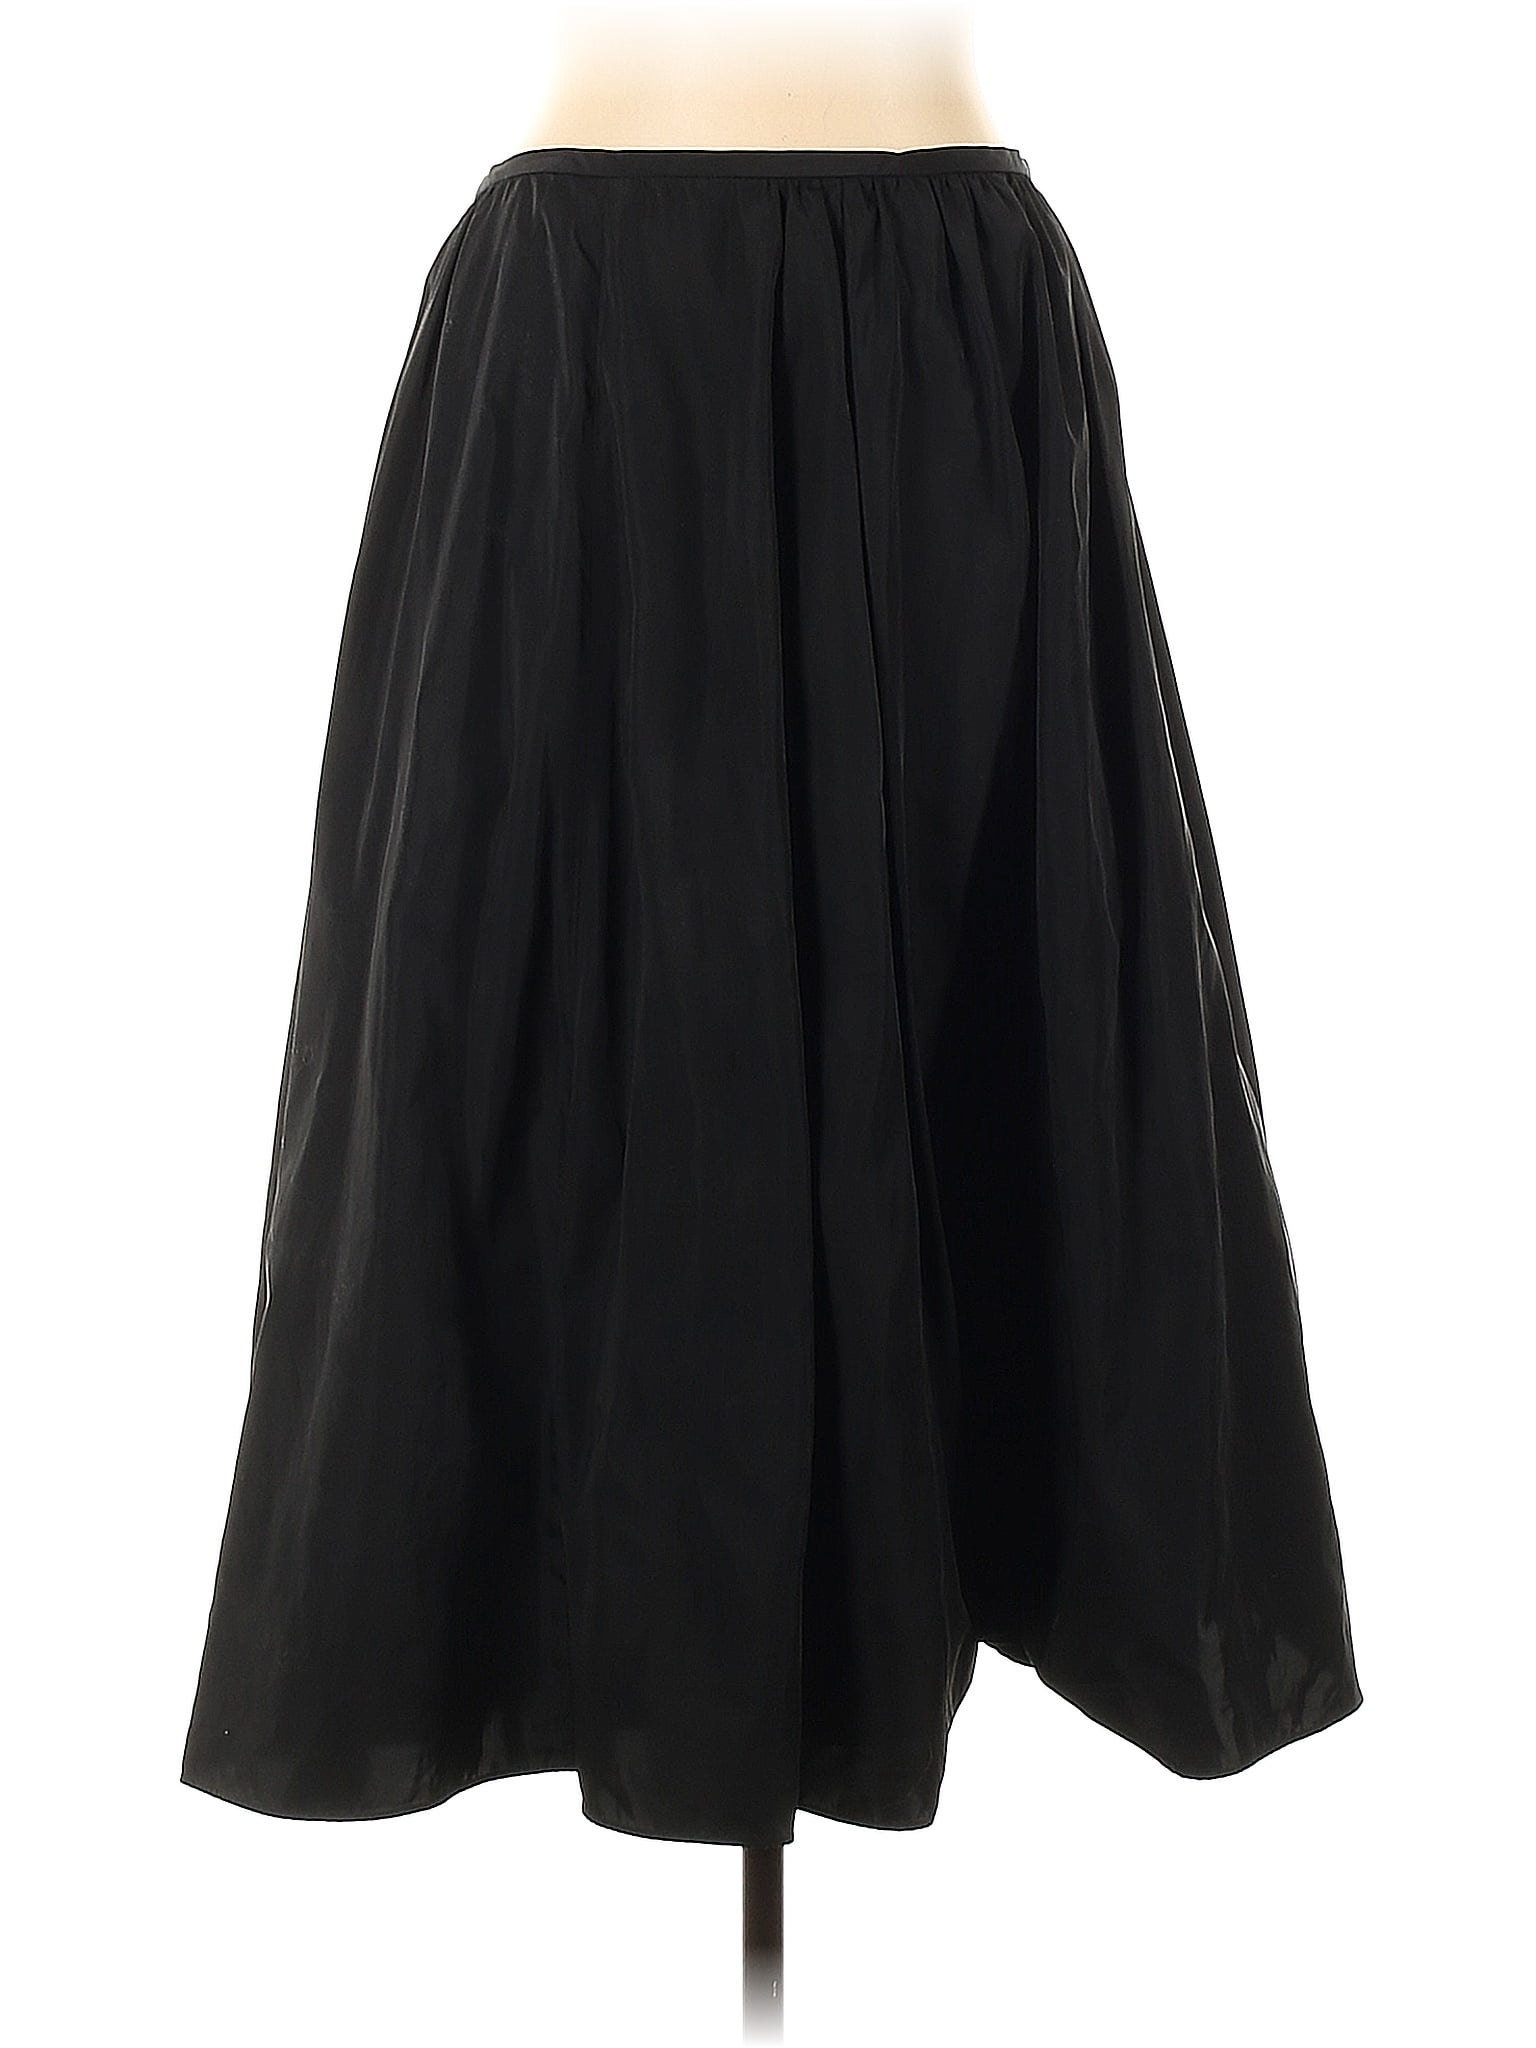 Tracy Reese 100% Polyester Black Formal Skirt Size 12 - 81% off | ThredUp